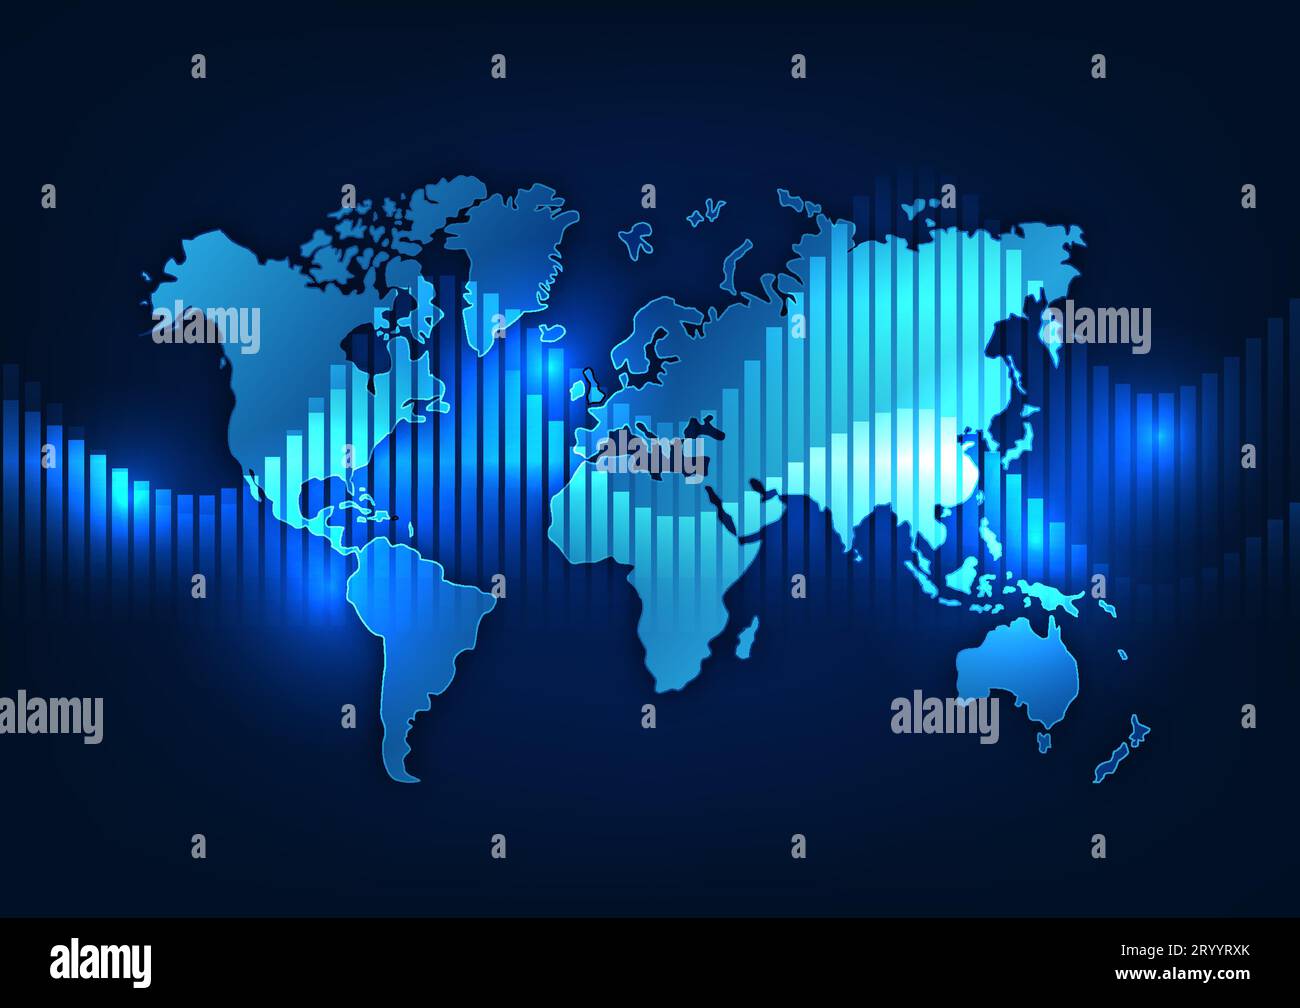 World map technology background with stock graph It represents the world's economy that is constantly changing. saw the business competition of each c Stock Vector